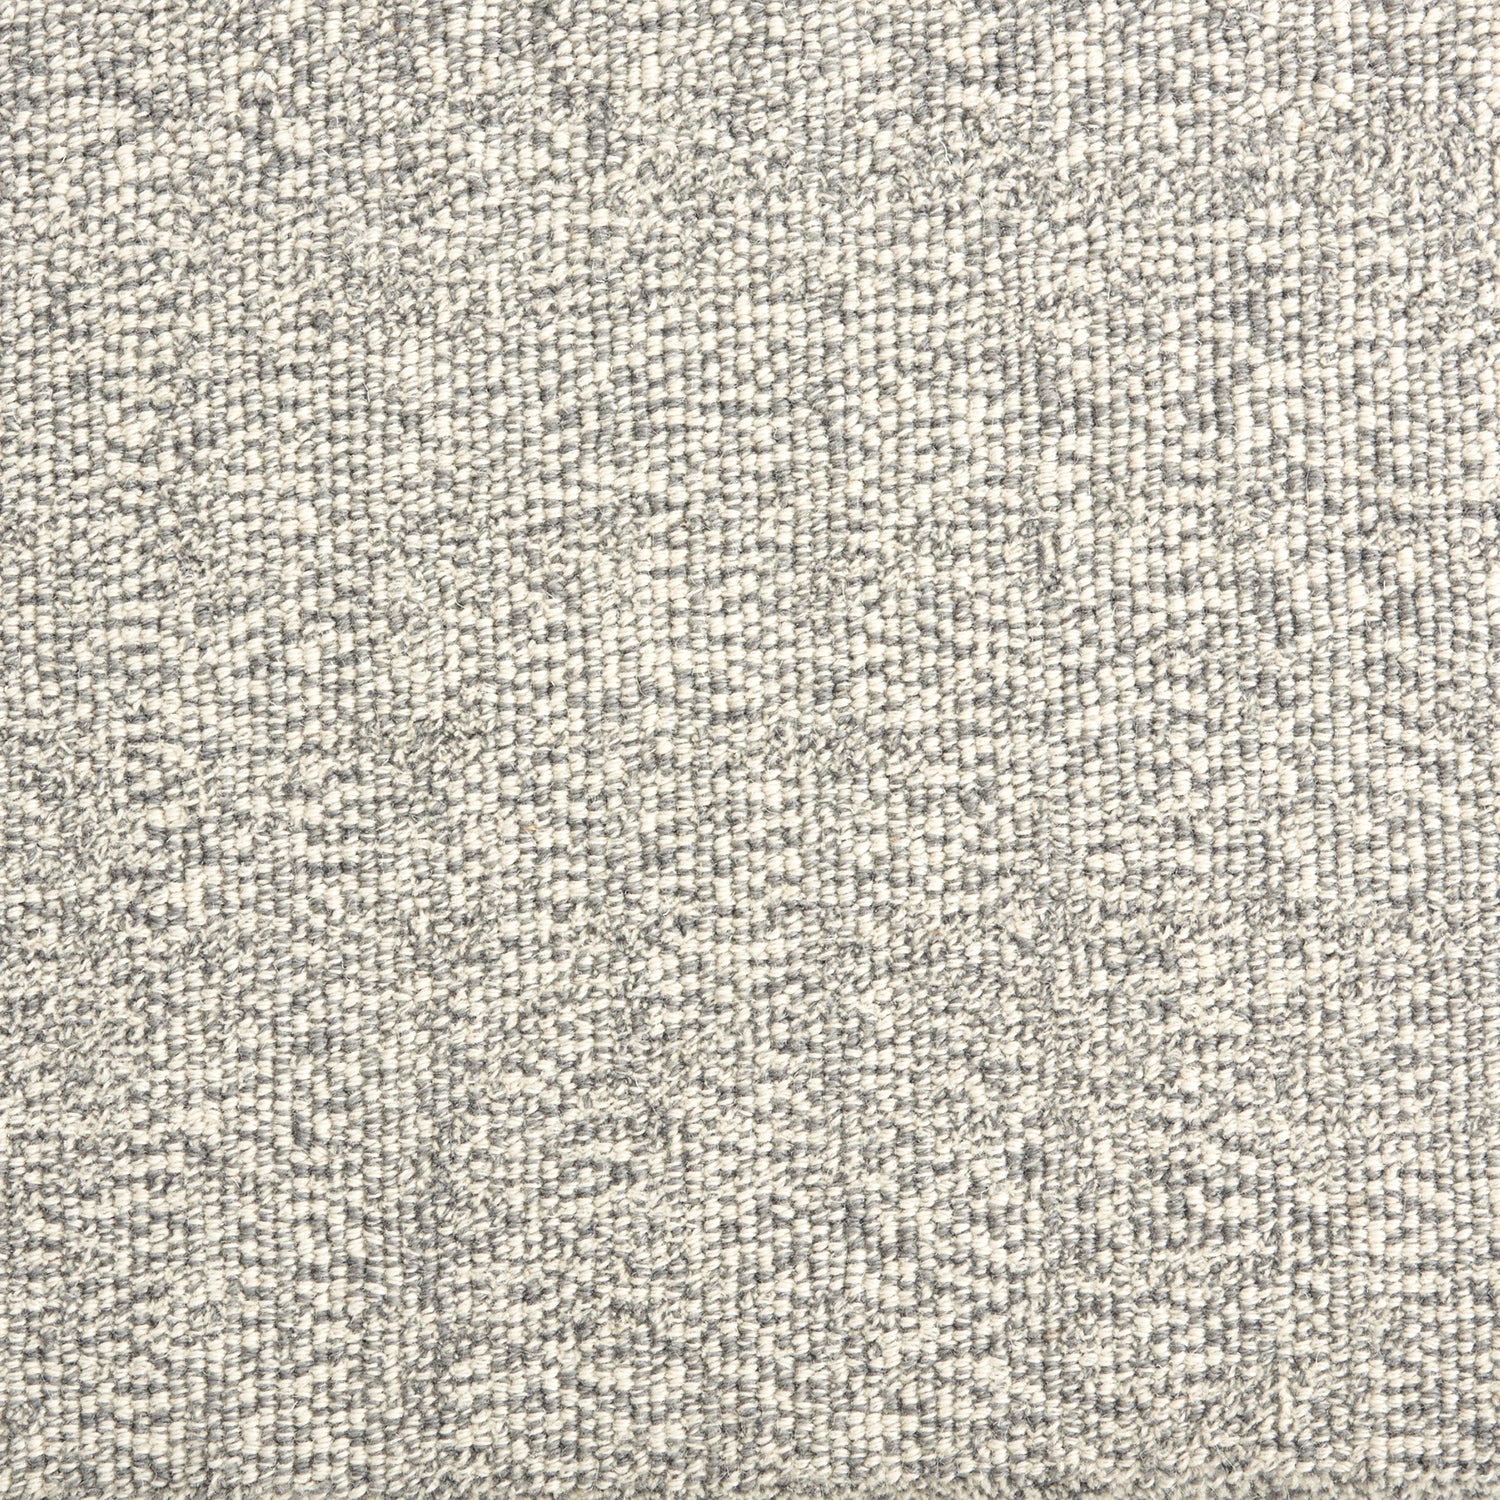 Wool broadloom carpet swatch in a textured weave in mottled cream and gray.